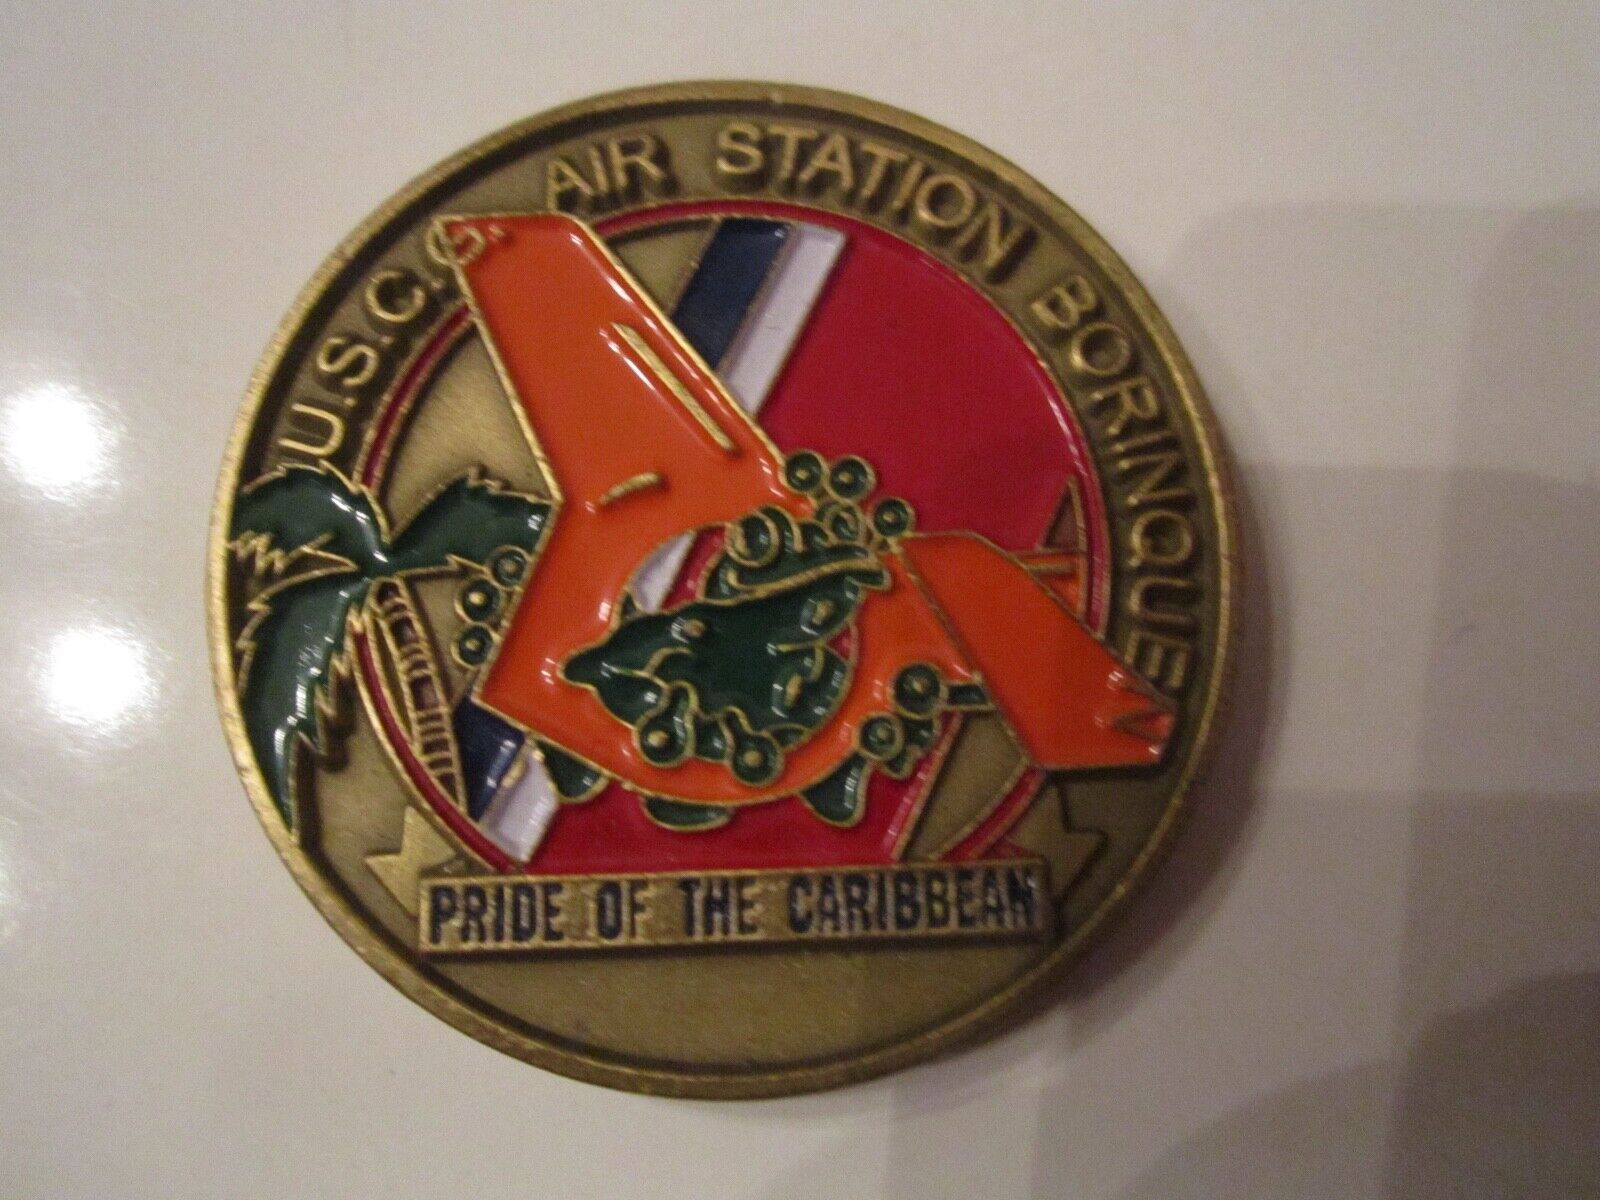 U.S.C.G. AIR STATION BORINQUE PRIDE OF THE CARRIBEAN CHALLENGE COIN -  OFC-11